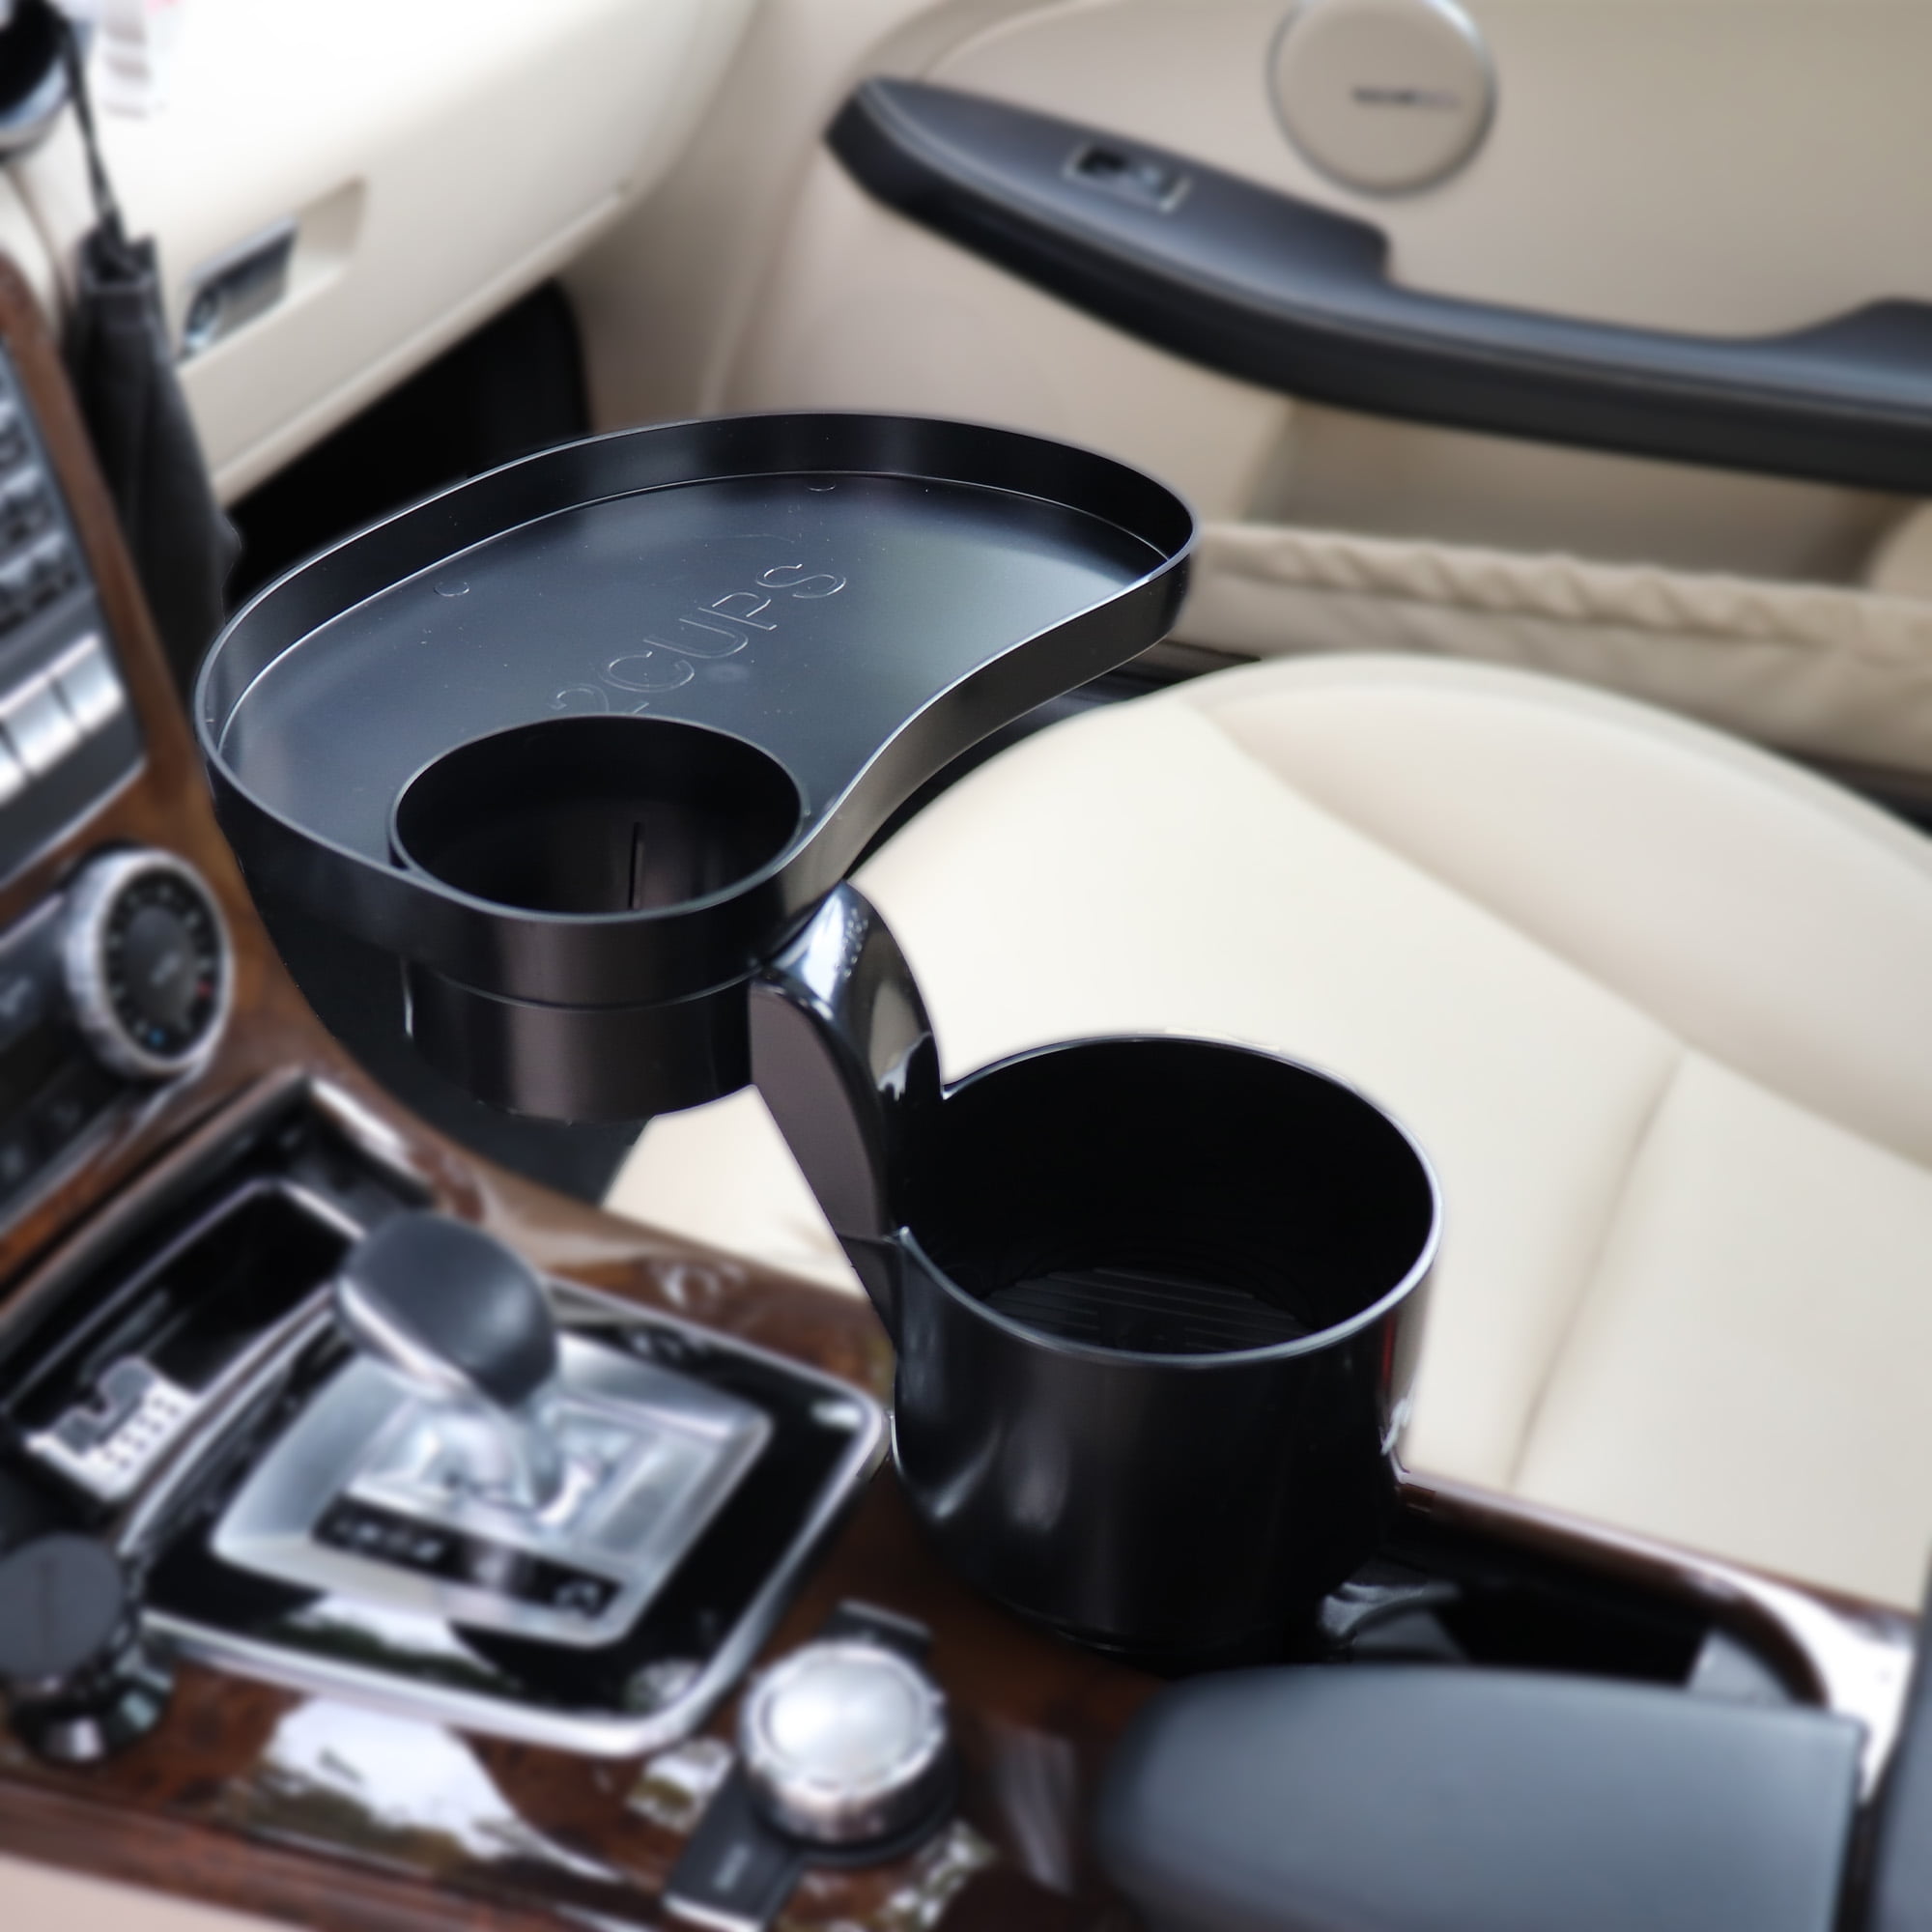 2CUPS Car Cup Holder Expander and Oval Tray Set [Used Like New - Matt Black]